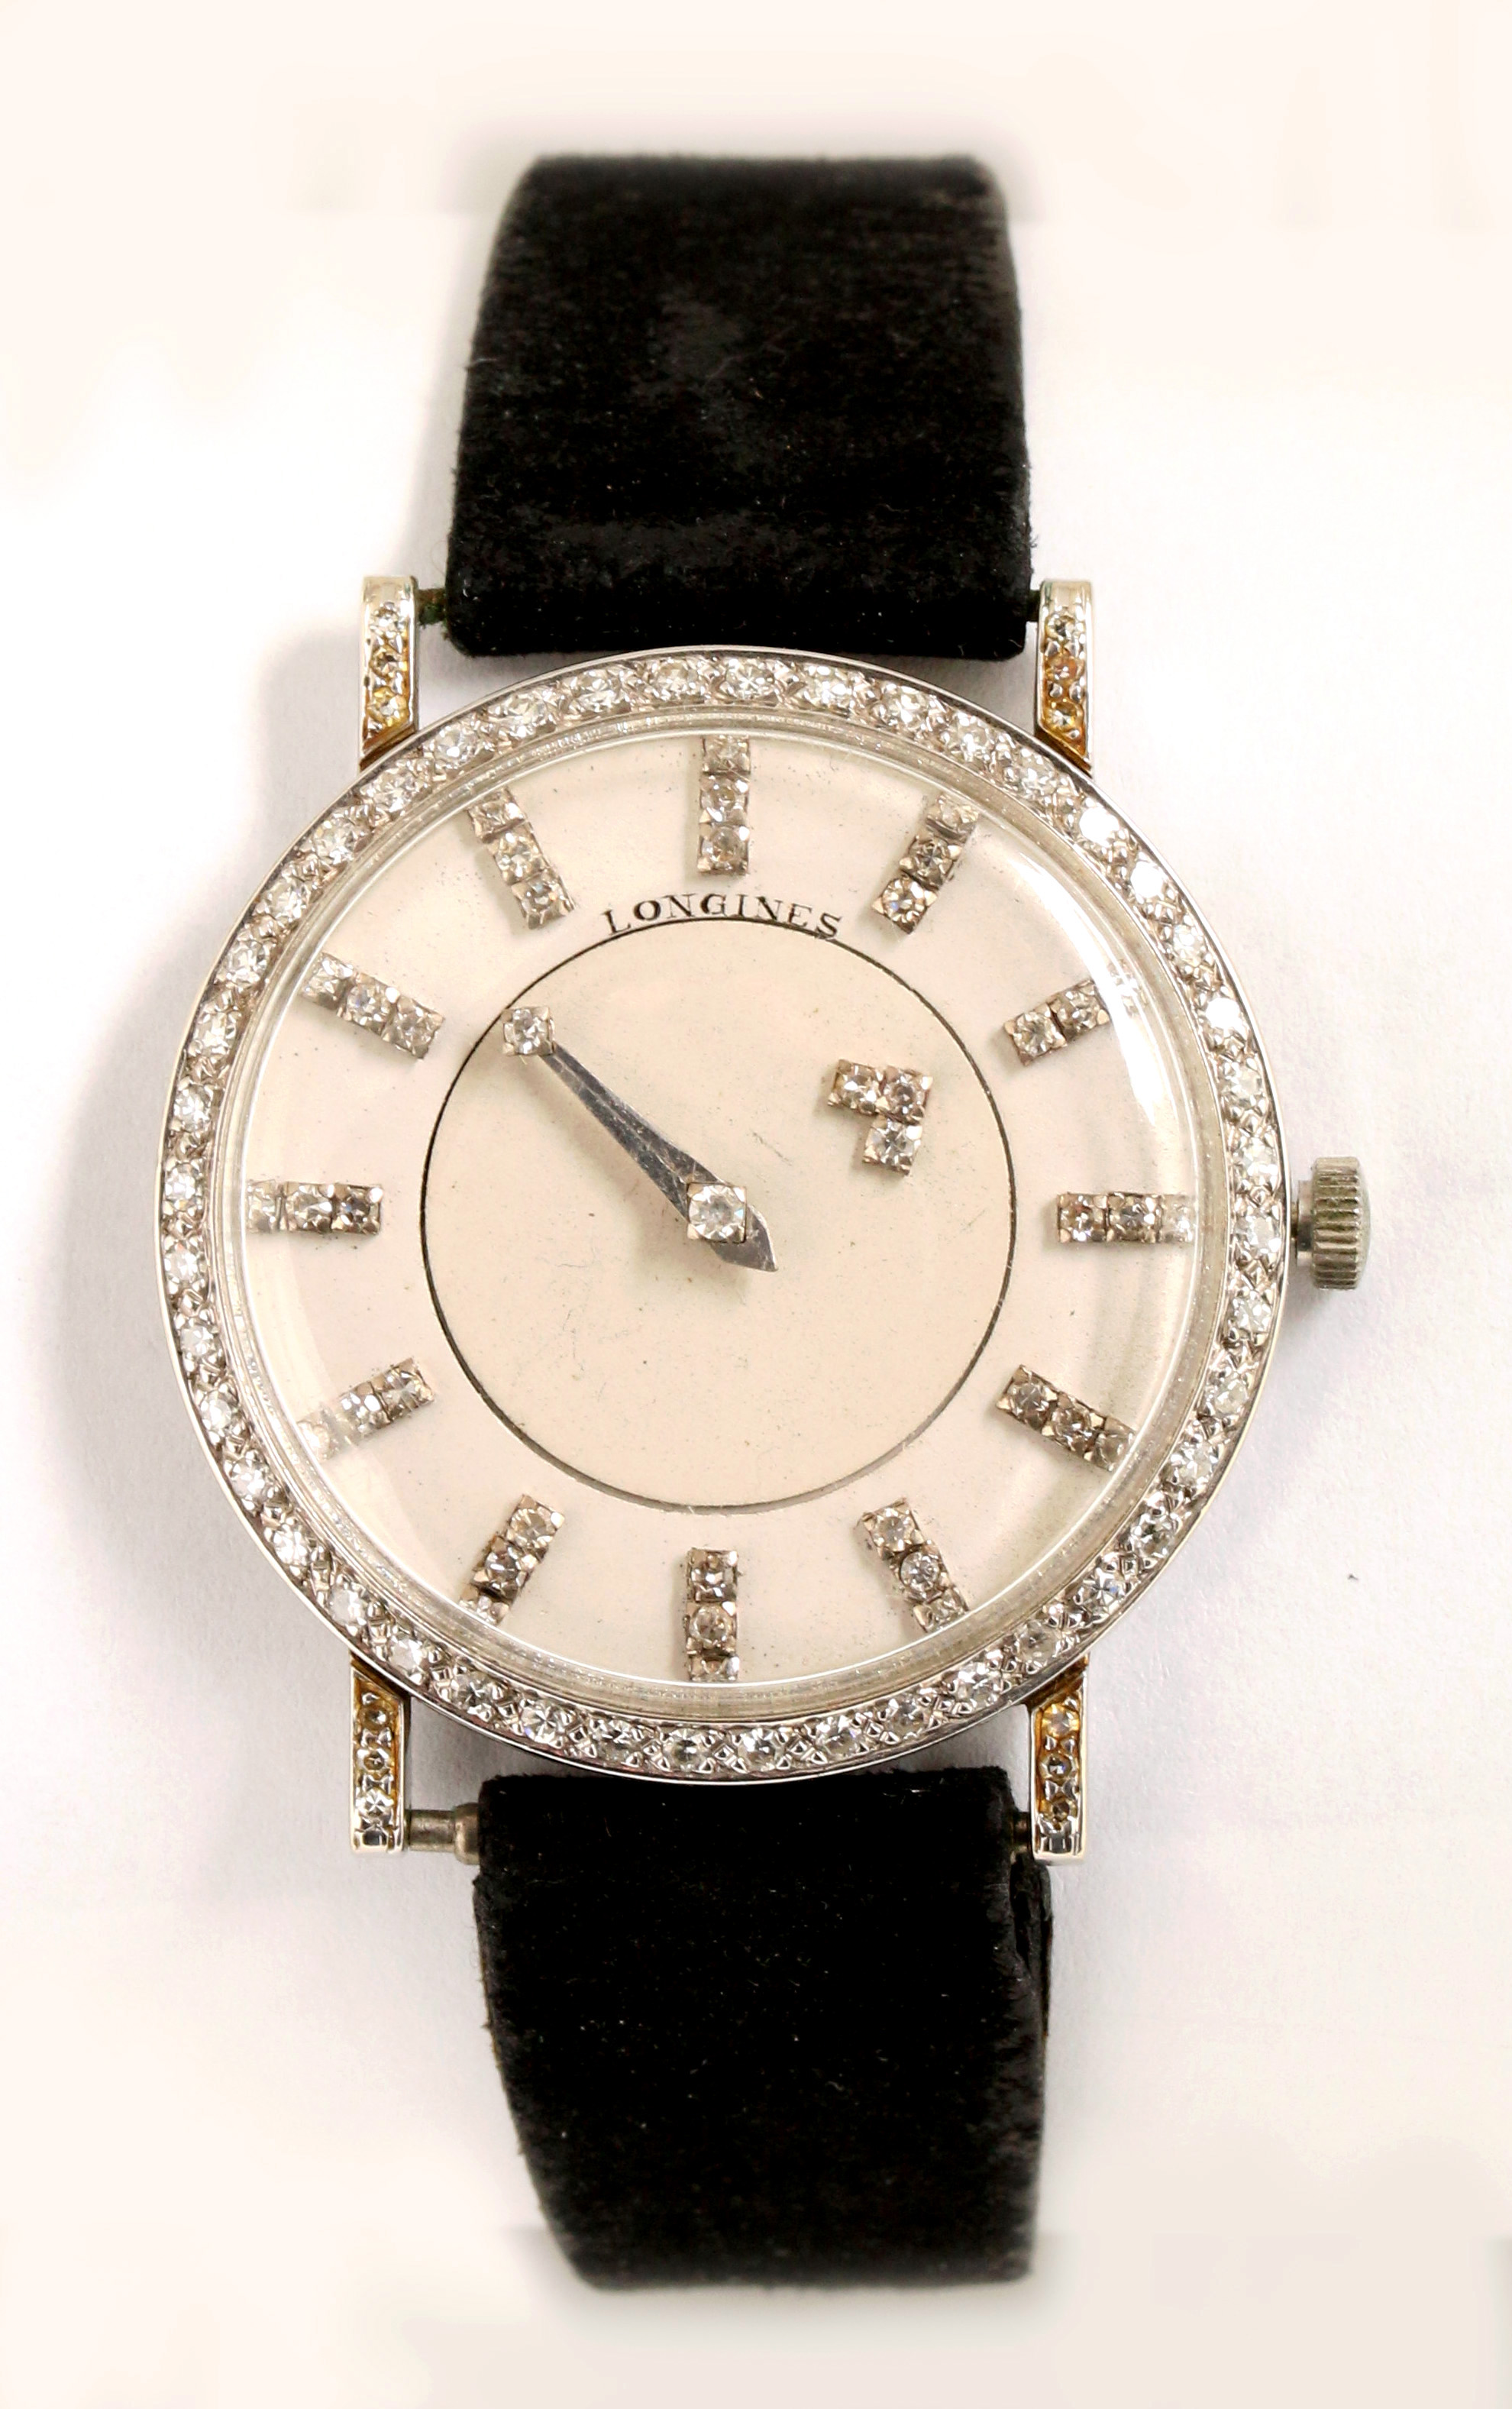 A GENT'S 18K WHITE GOLD AND DIAMOND LONGINES WATCH